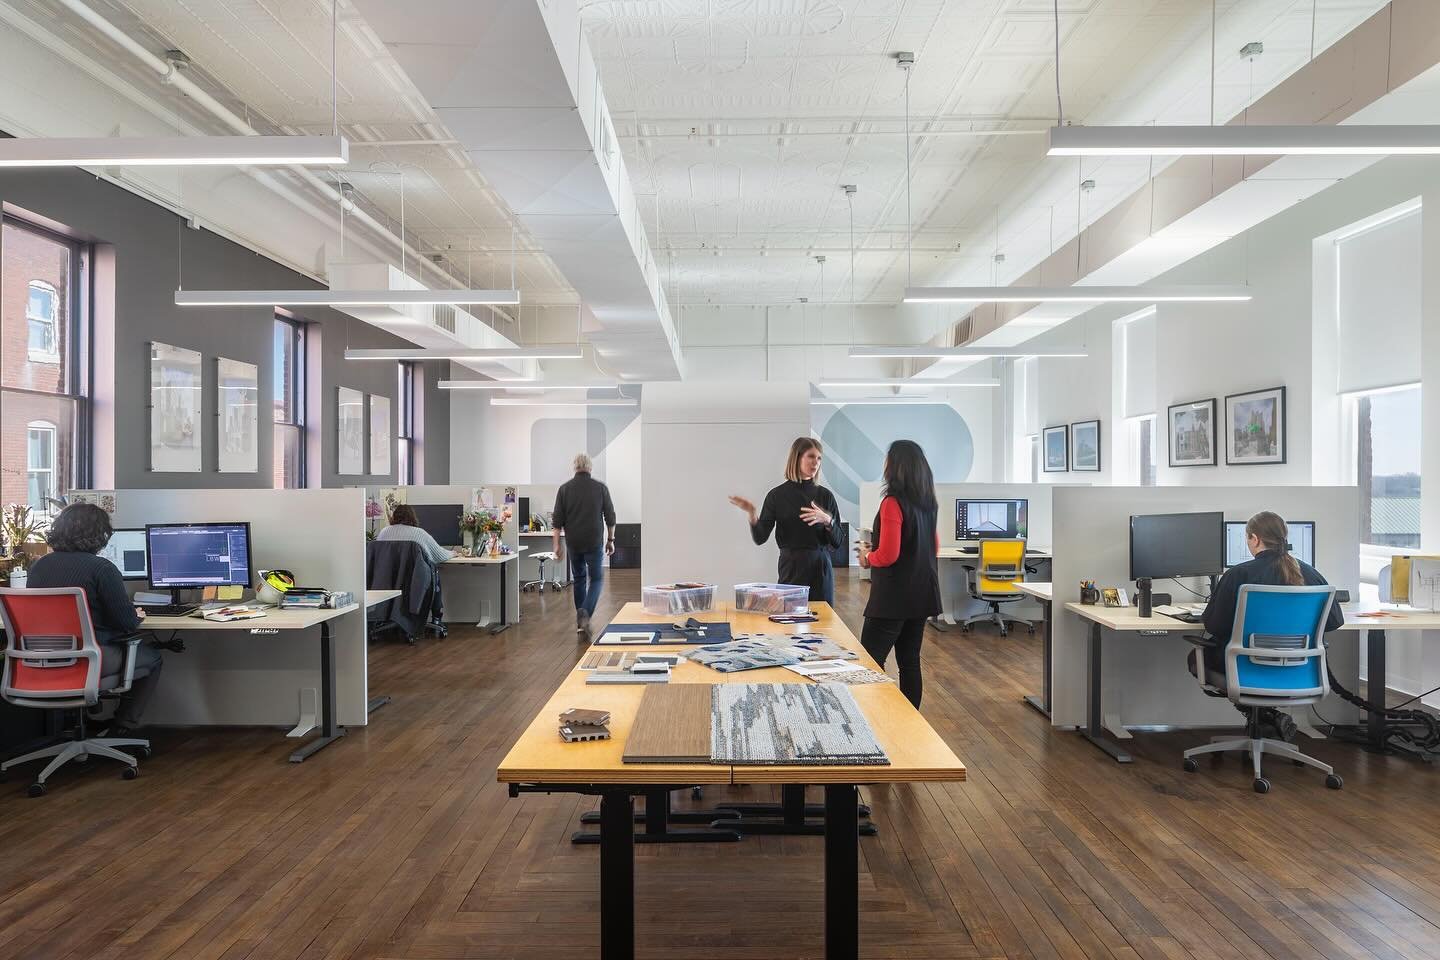 Showcasing our fifth-floor office space in downtown Columbus, designed to inspire collaboration and creativity. It contains open spaces and communal meeting areas for our team, as well as private, sound-proof meeting booths.
&bull;
&bull;
&bull;
&bul